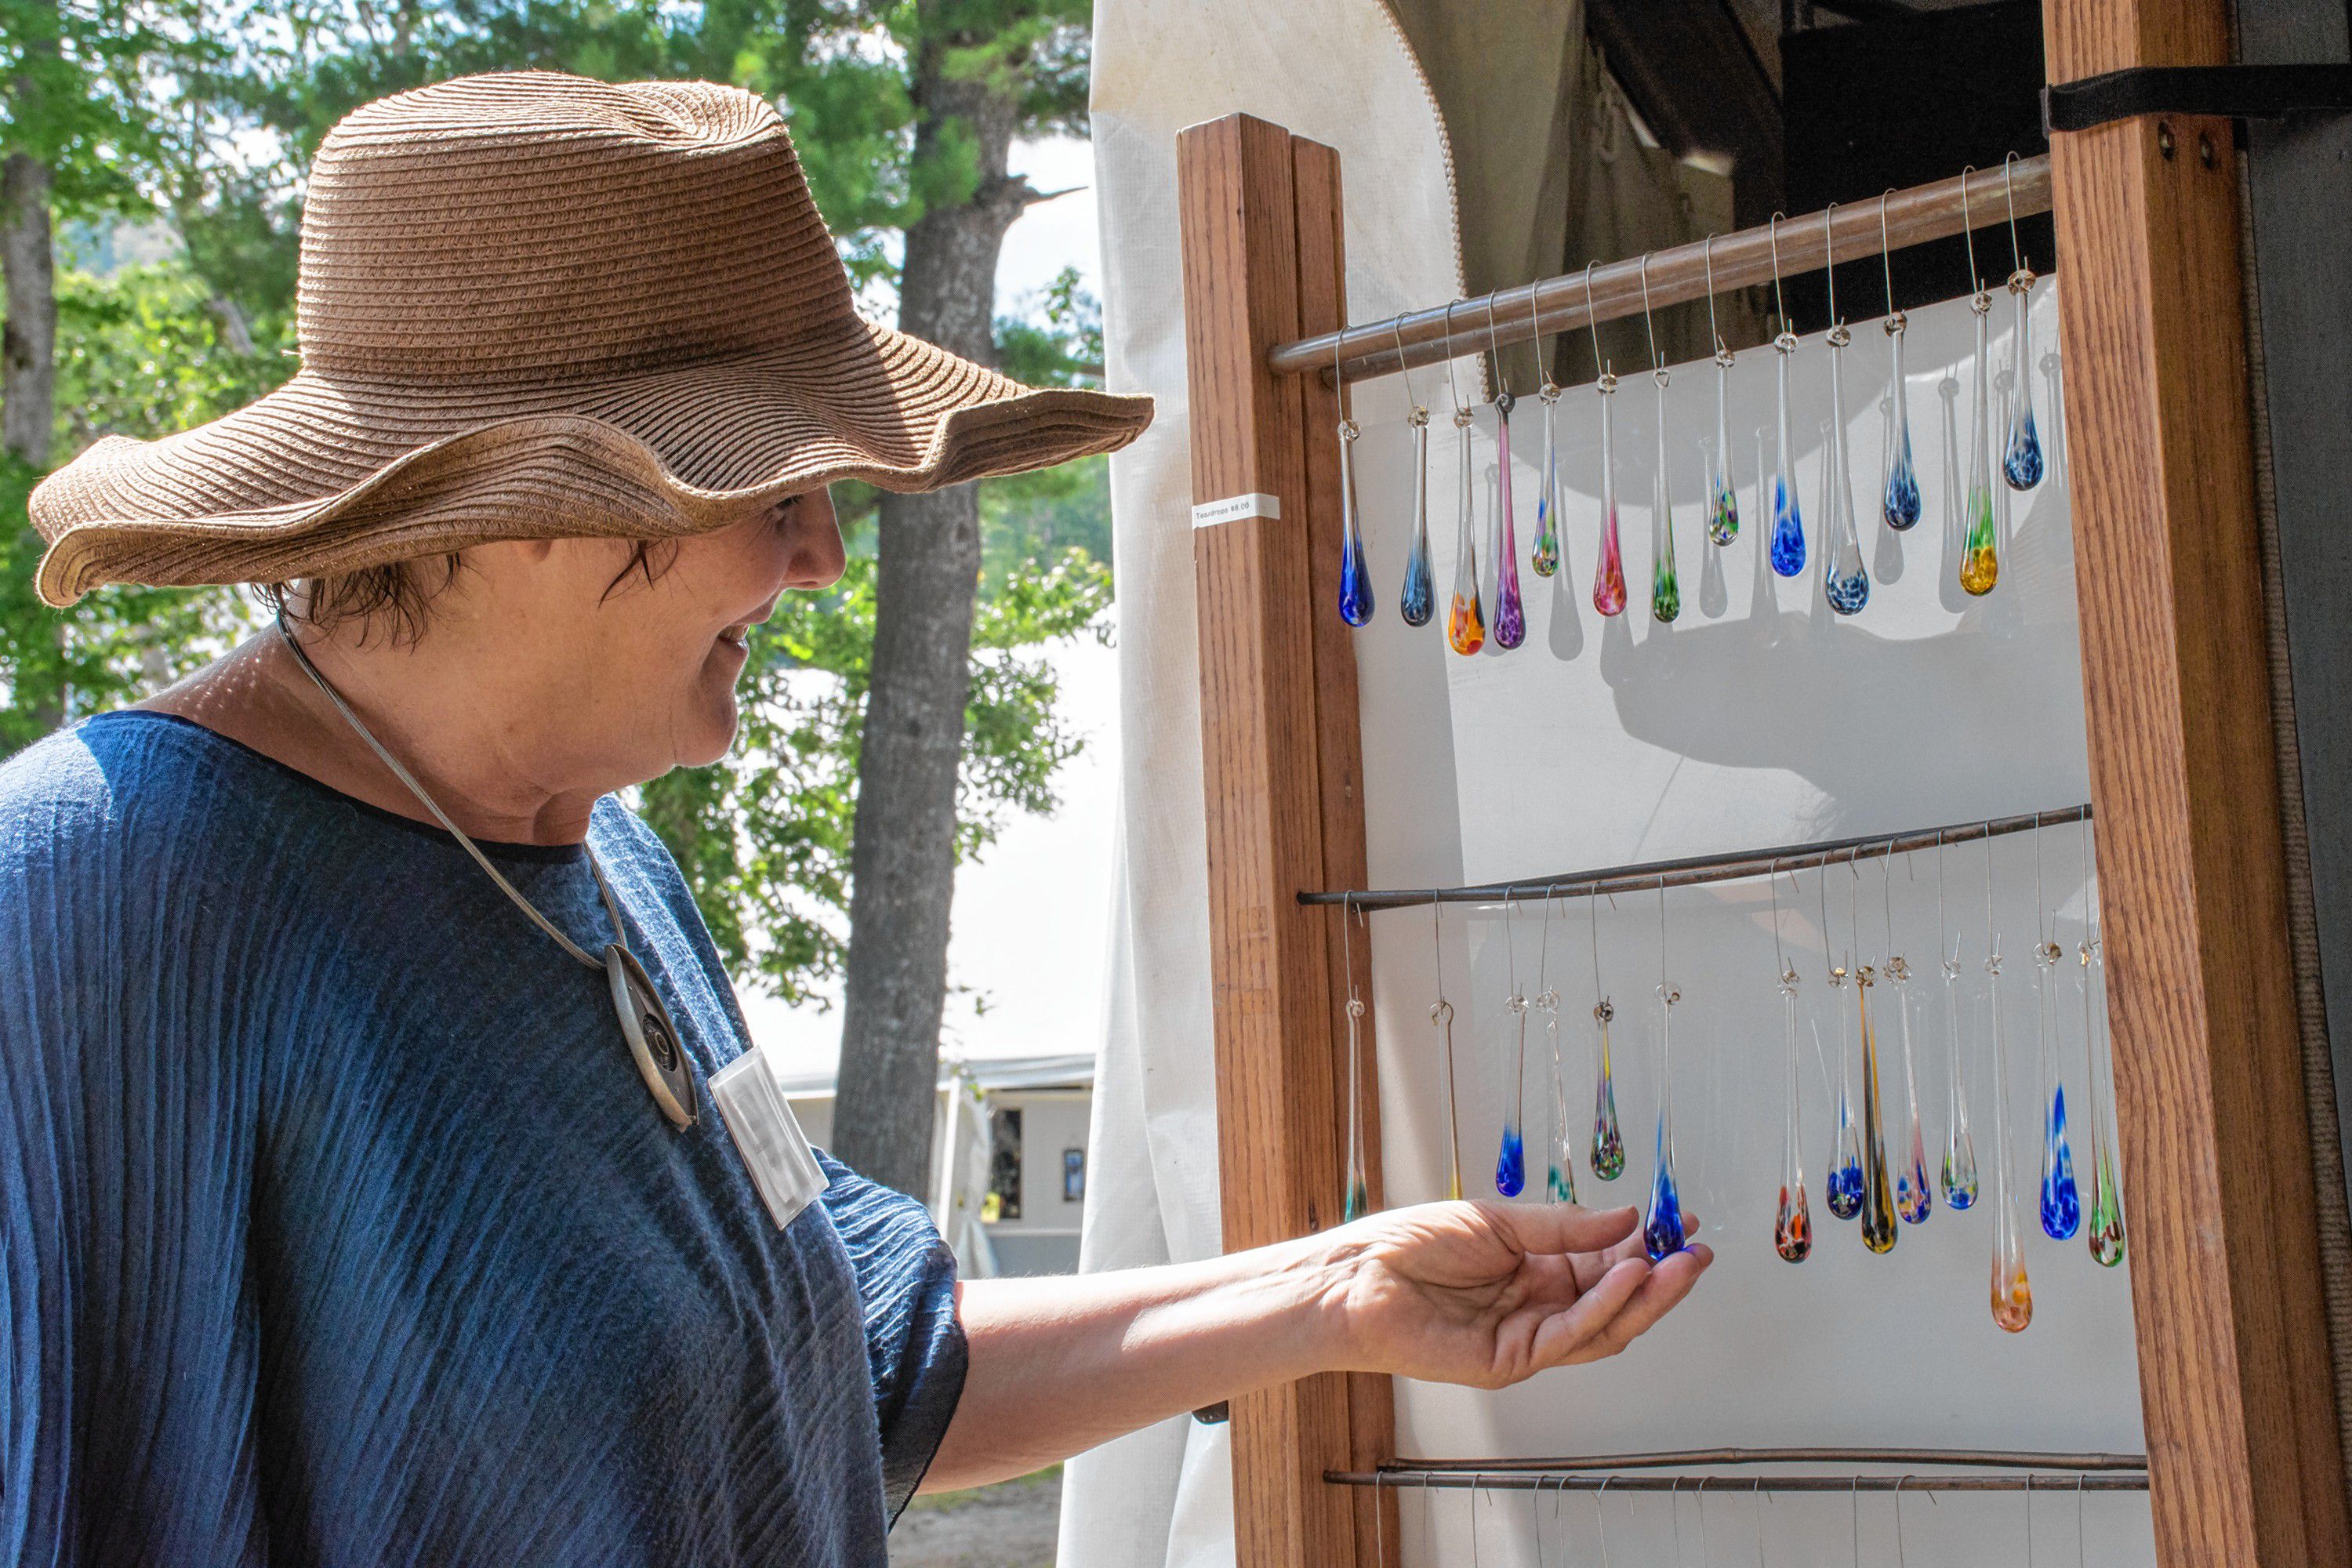 Miriam Carter, executive director of the League of New Hampshire Craftsmen, admires one of the "Sunapee Raindrops" created by glassblowers Harry and Wendy Besett, of Hardwick, Vt. (Nancy Nutile-McMenemy photograph)